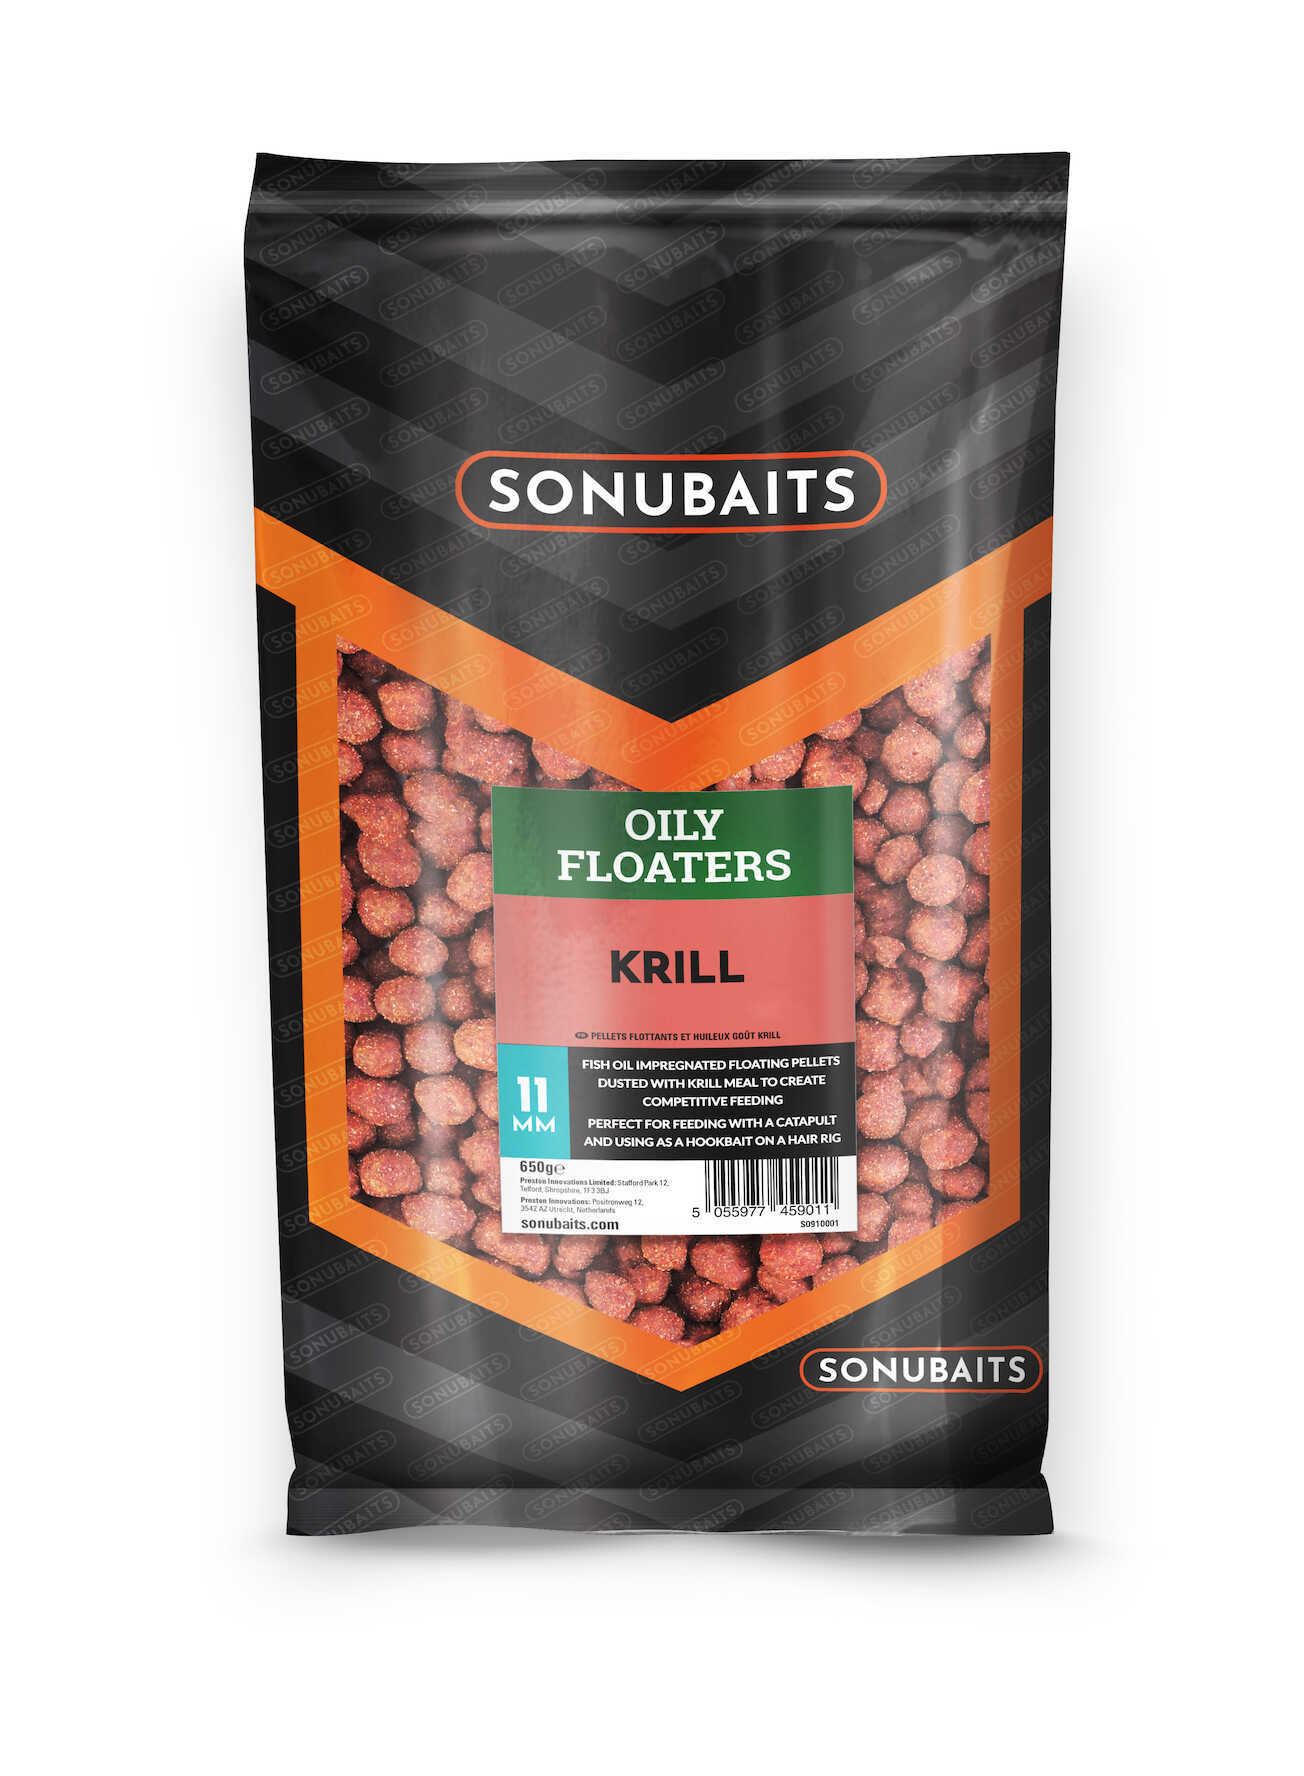 Sonu Baits Oily Floaters 11mm